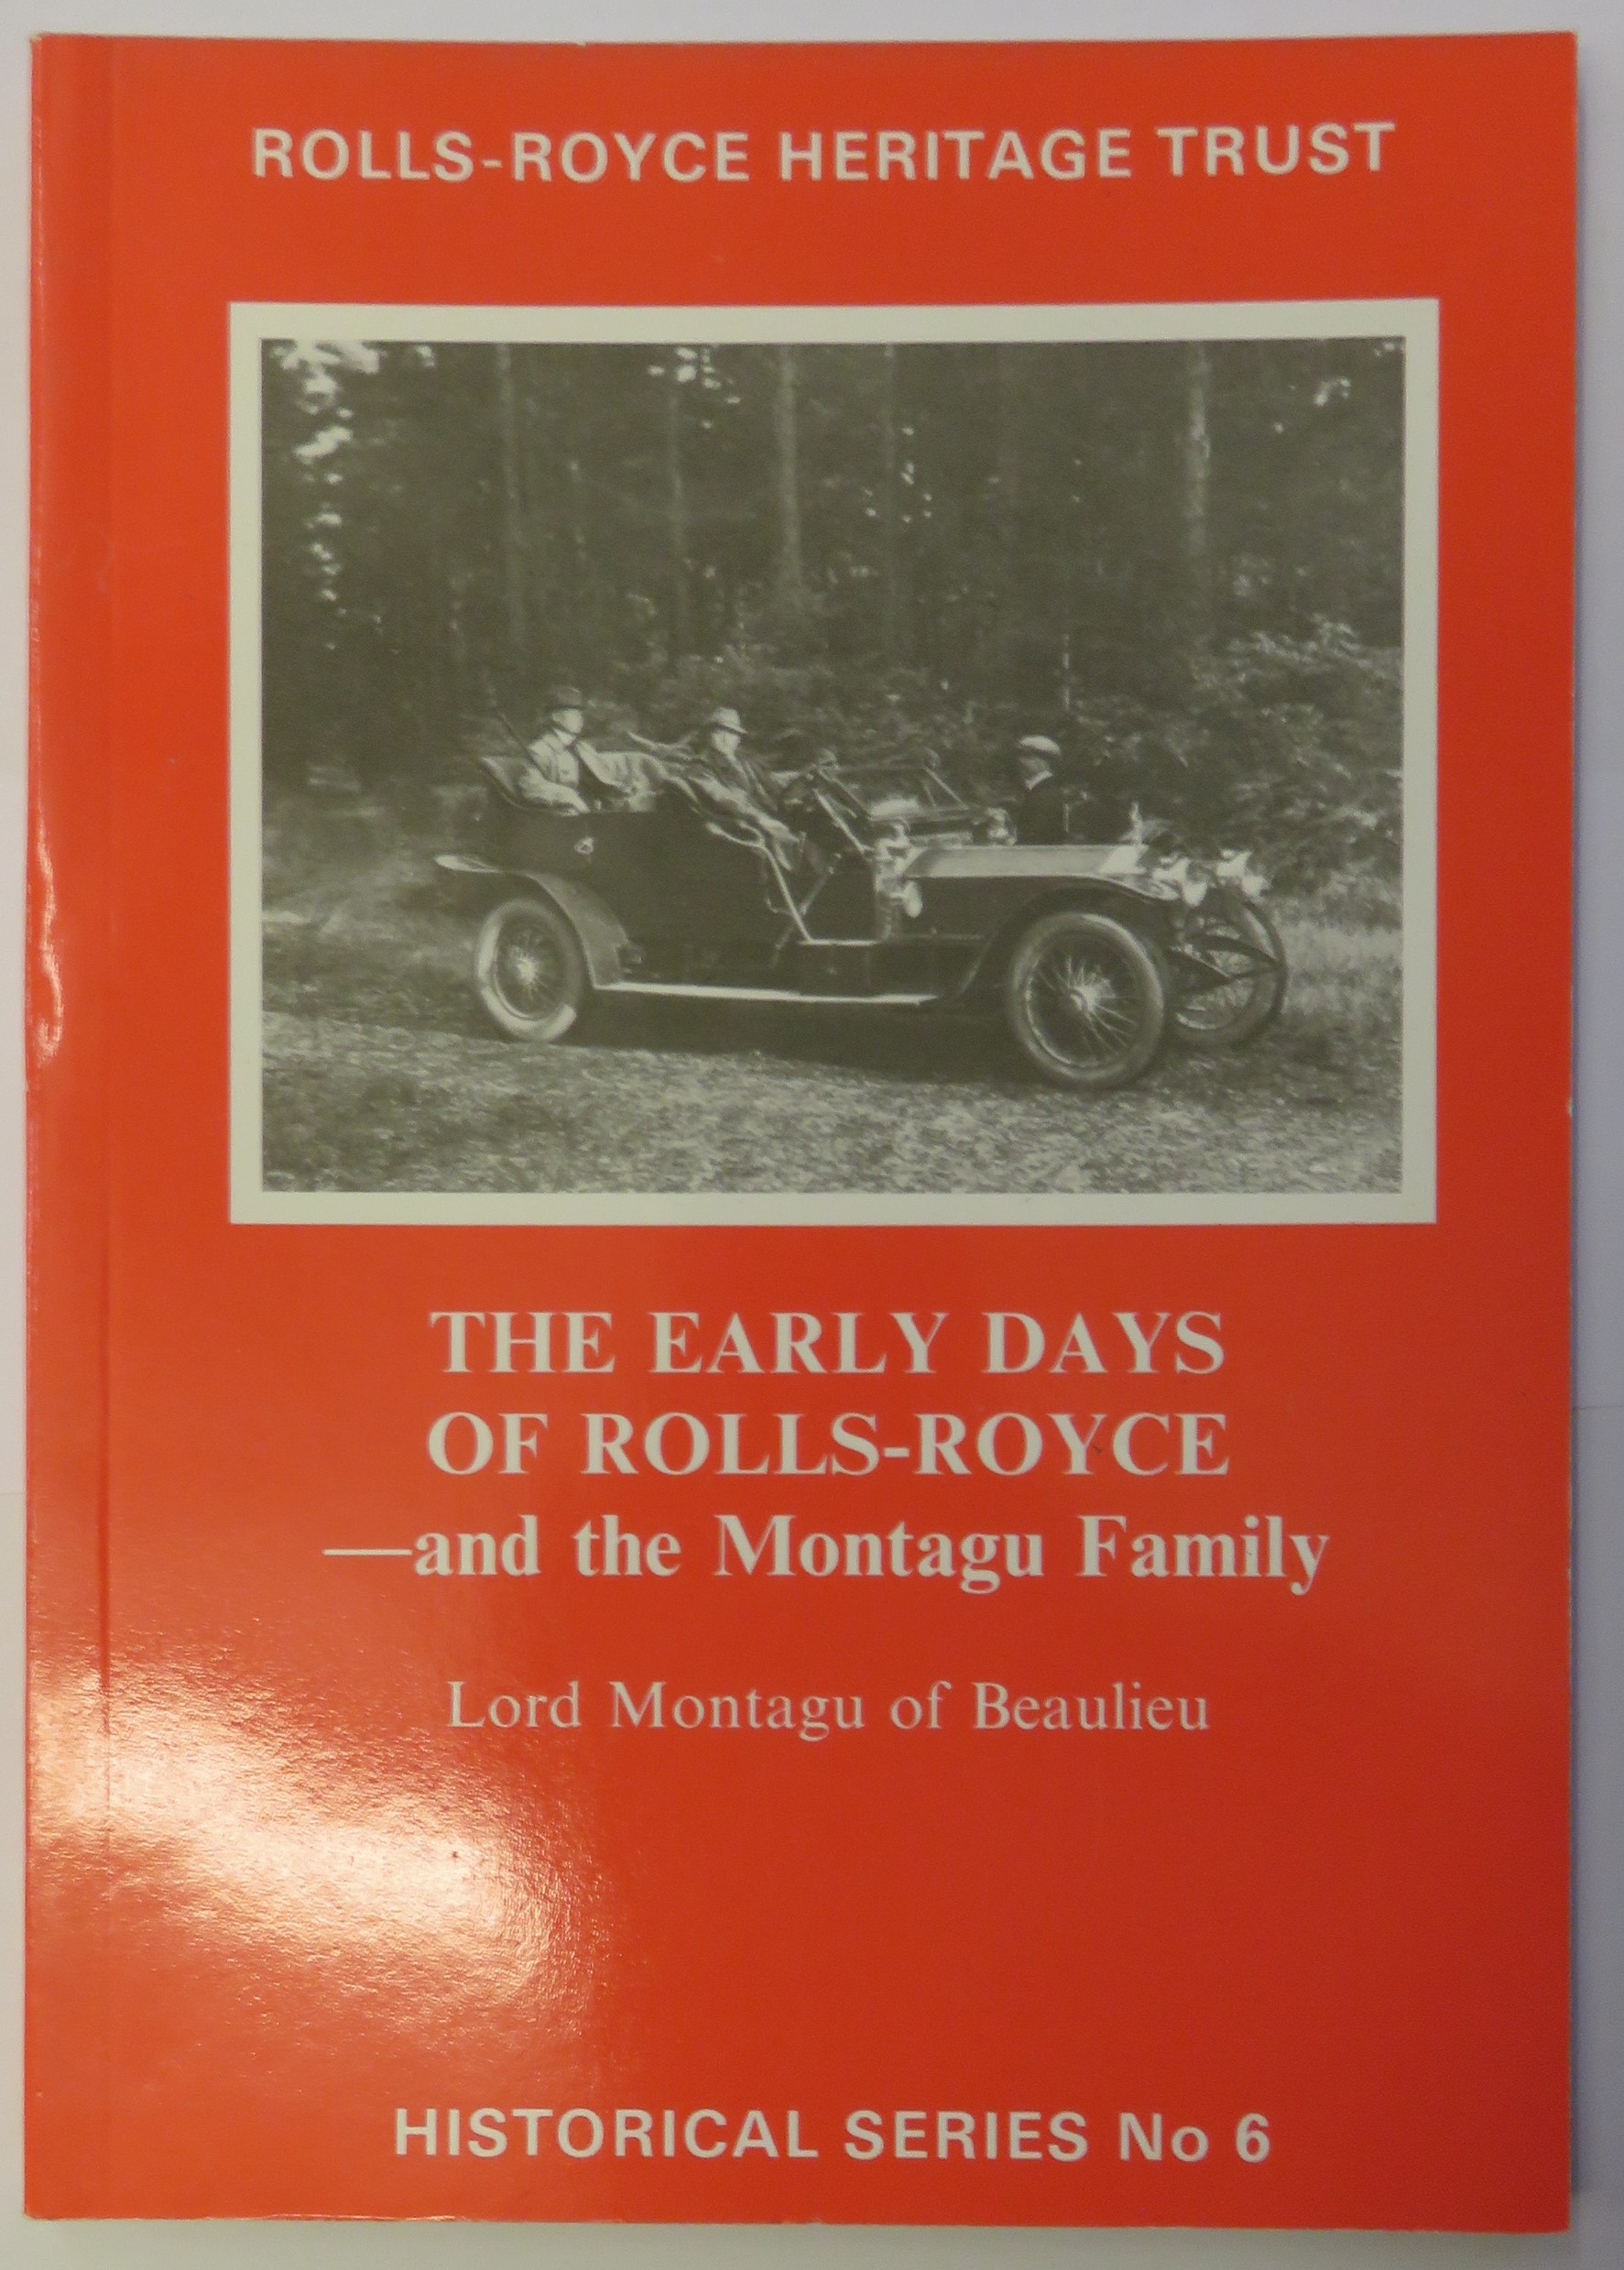 The Early Days of Rolls-Royce - and the Montagu Family